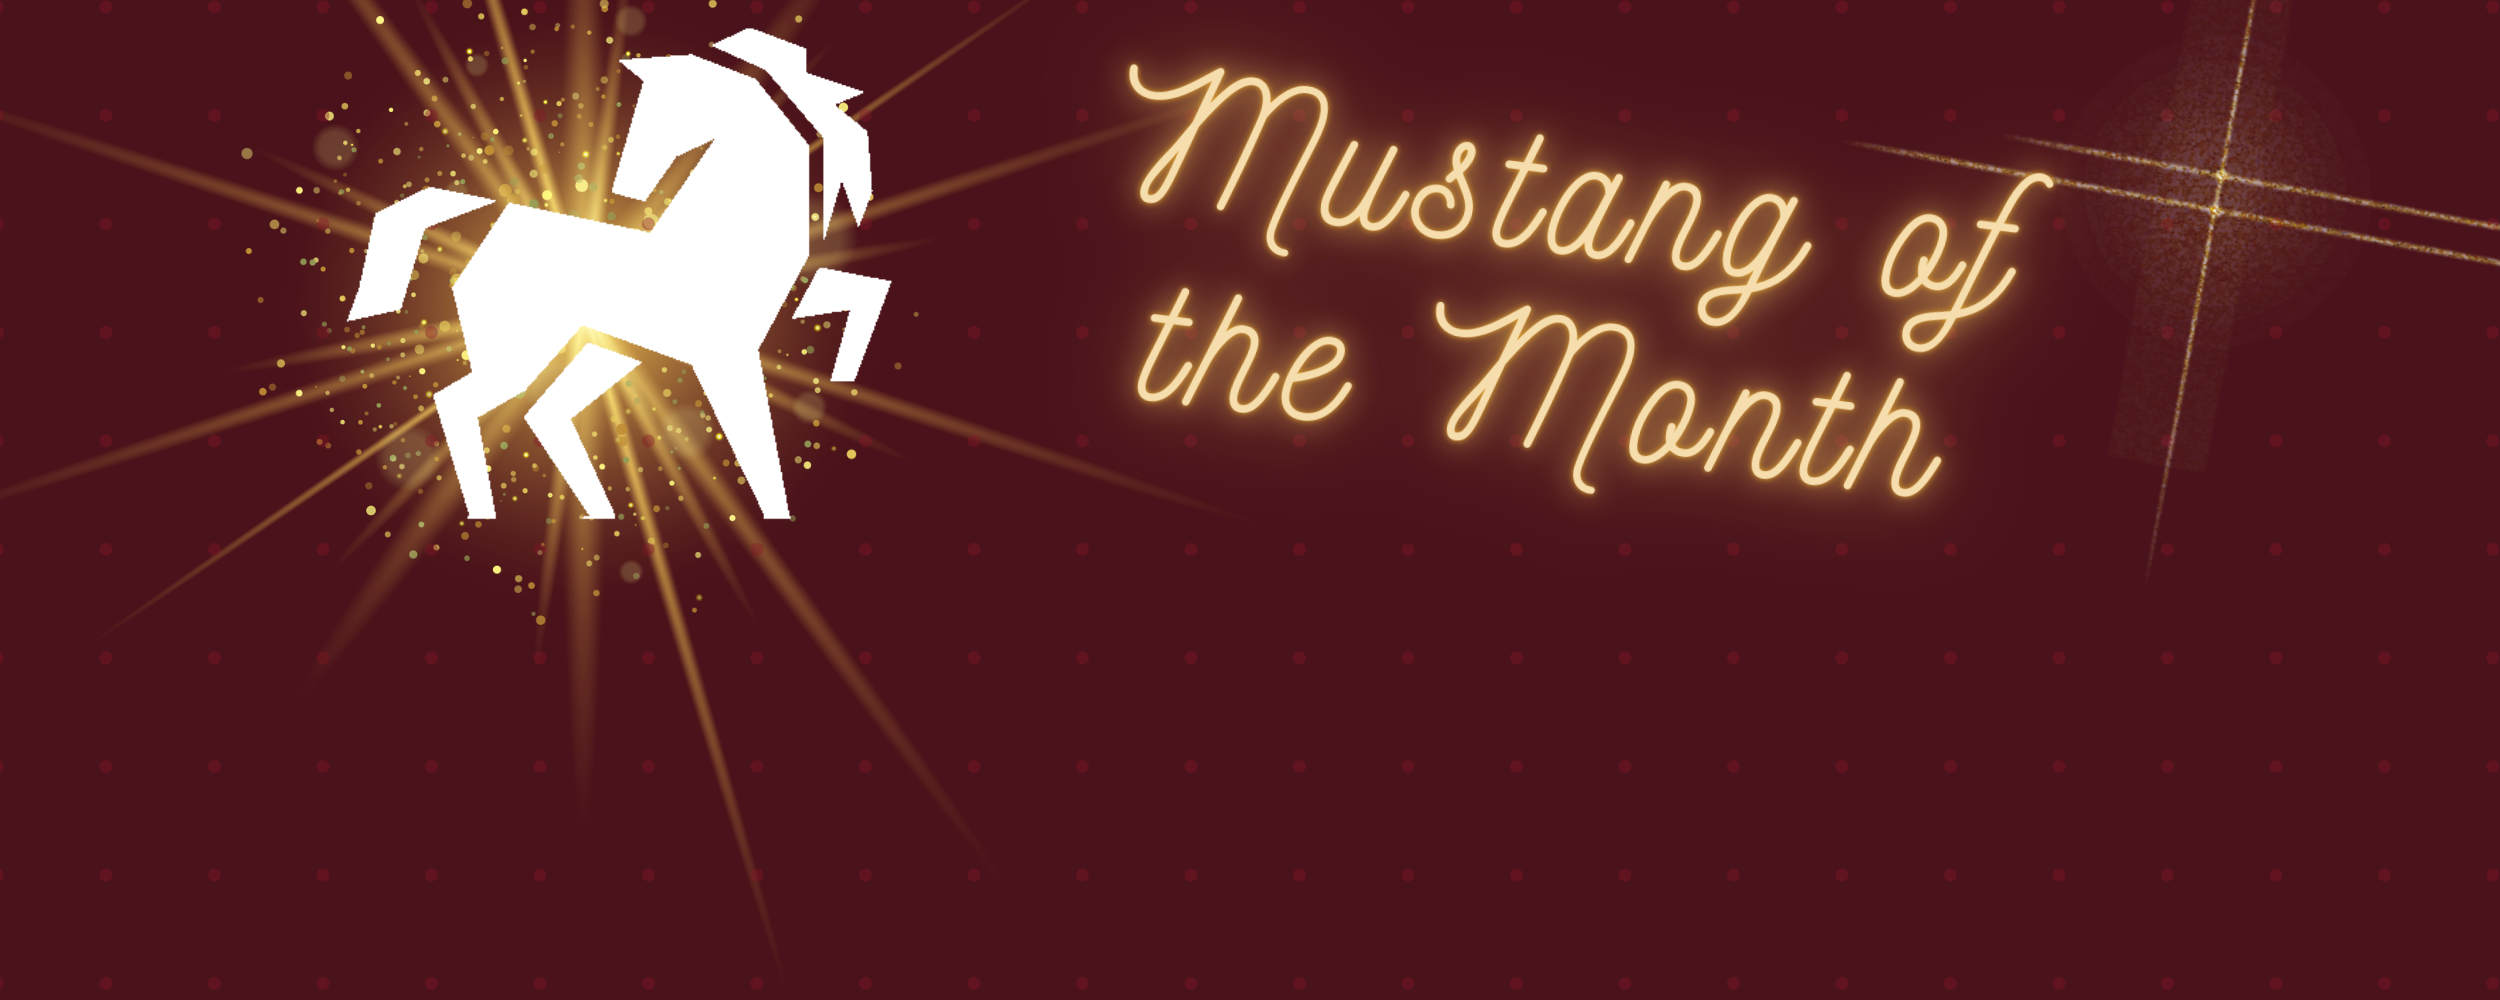 Mustang of the Month hero image banner